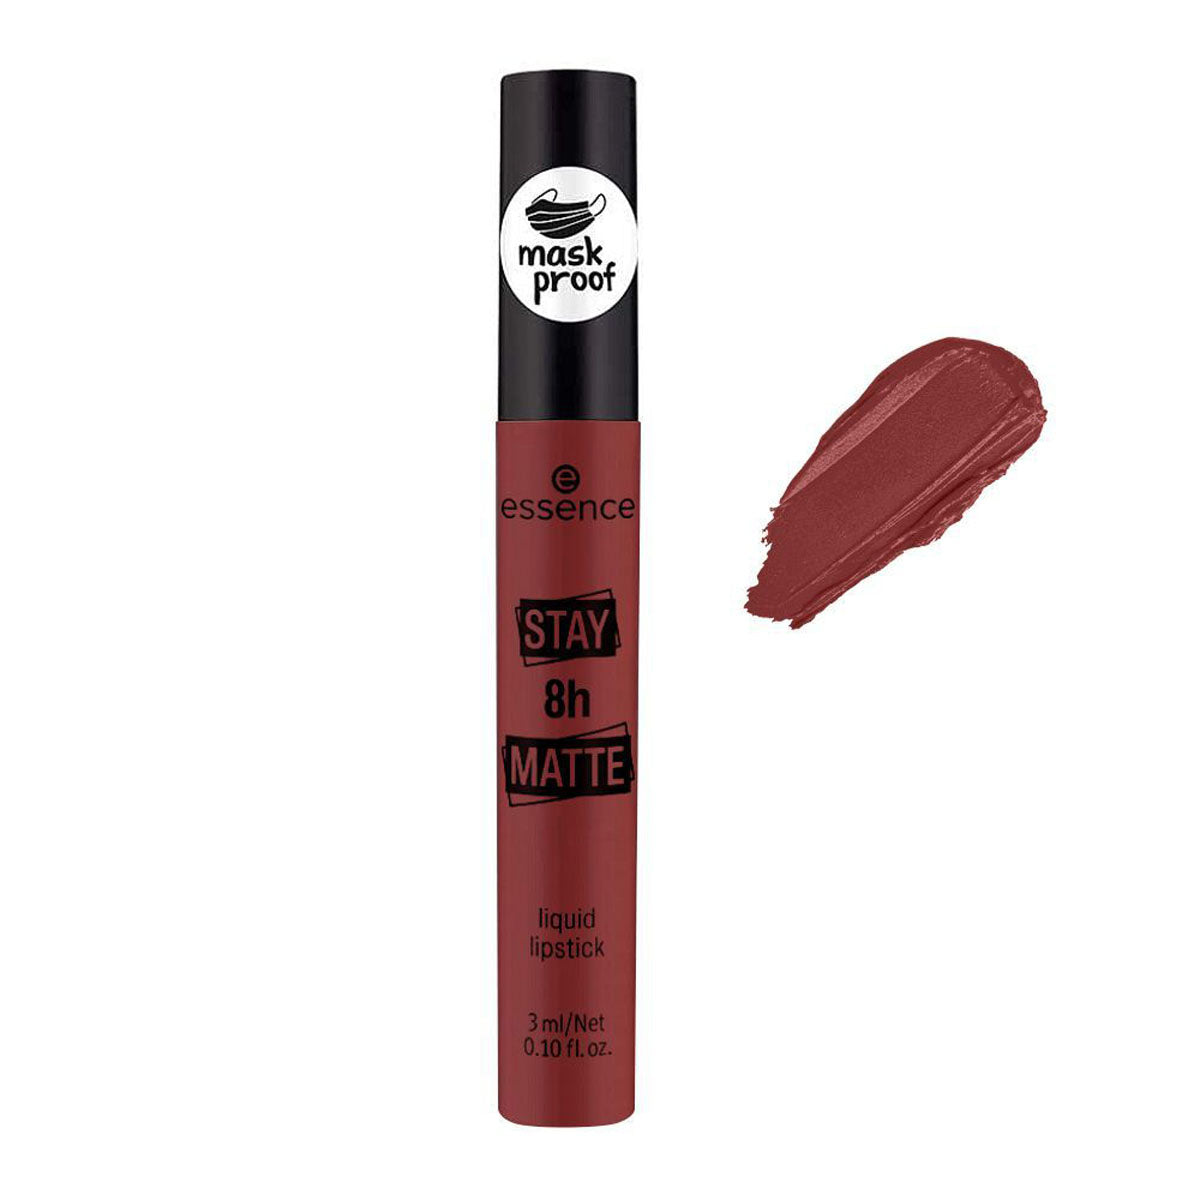 Essence - Stay 8h Matte Liquid Lipstick - 09 Bite Me If You Can